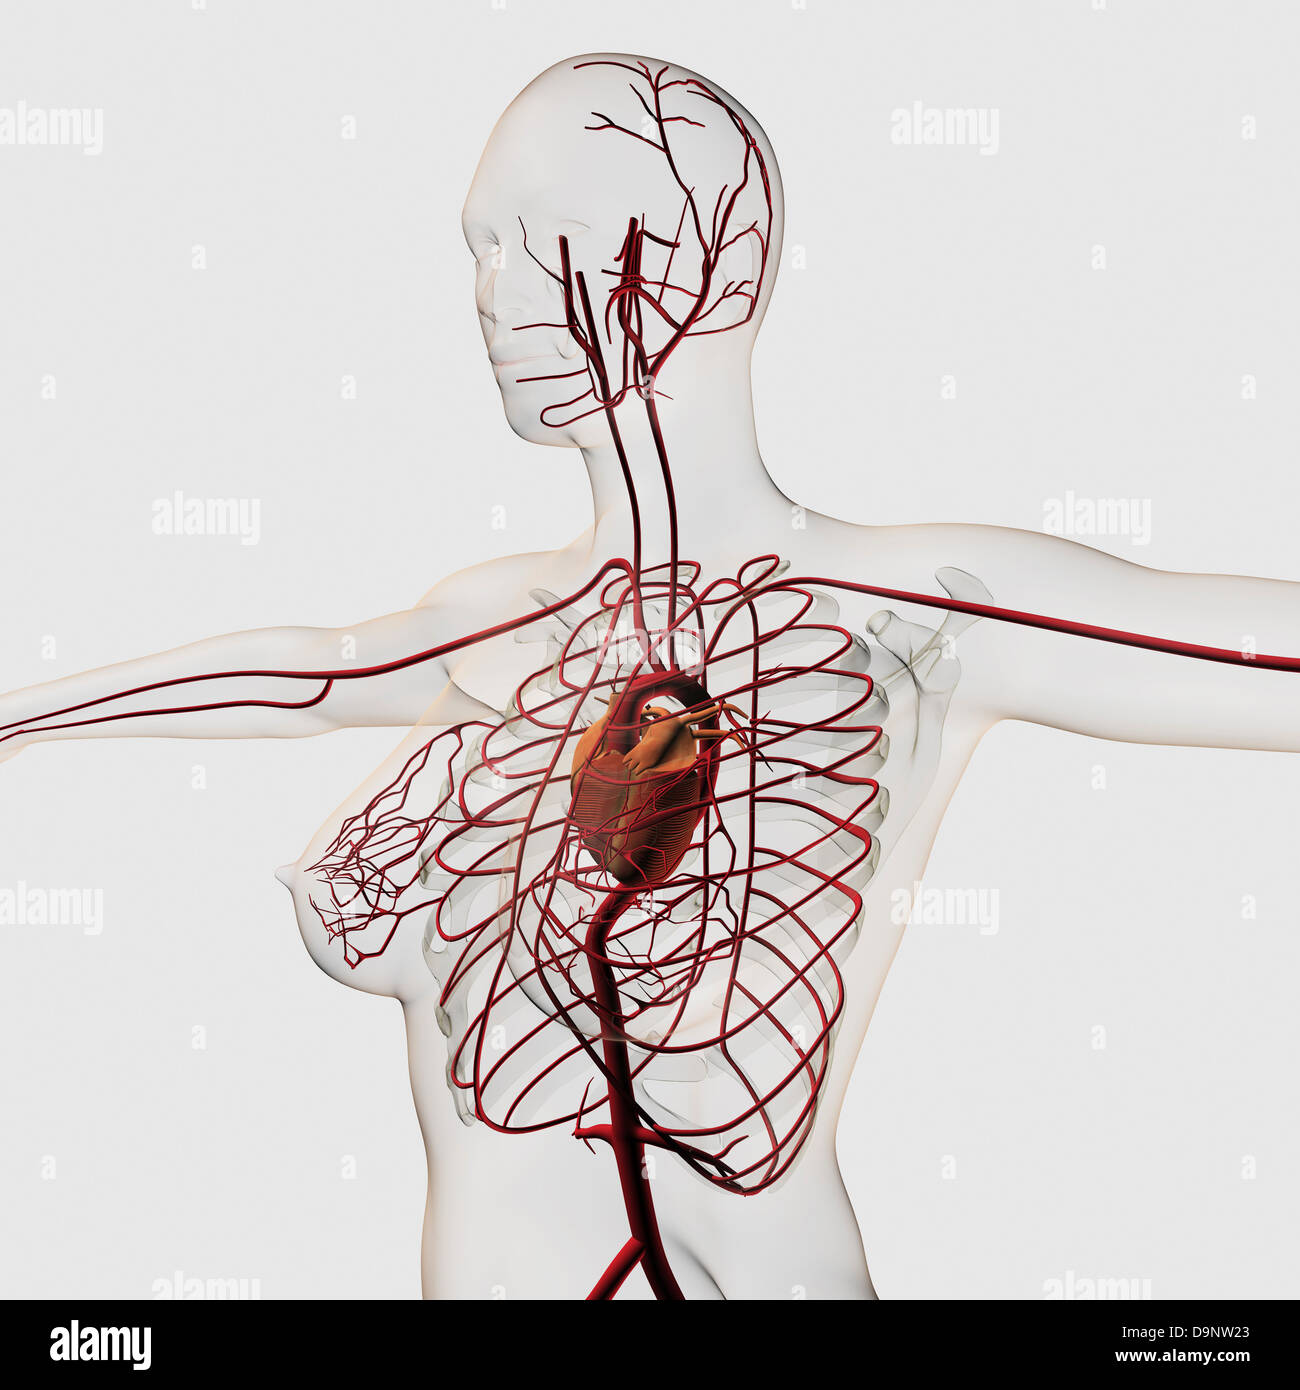 Medical illustration of female circulatory system with heart and arteries visible, three dimensional view. Stock Photo